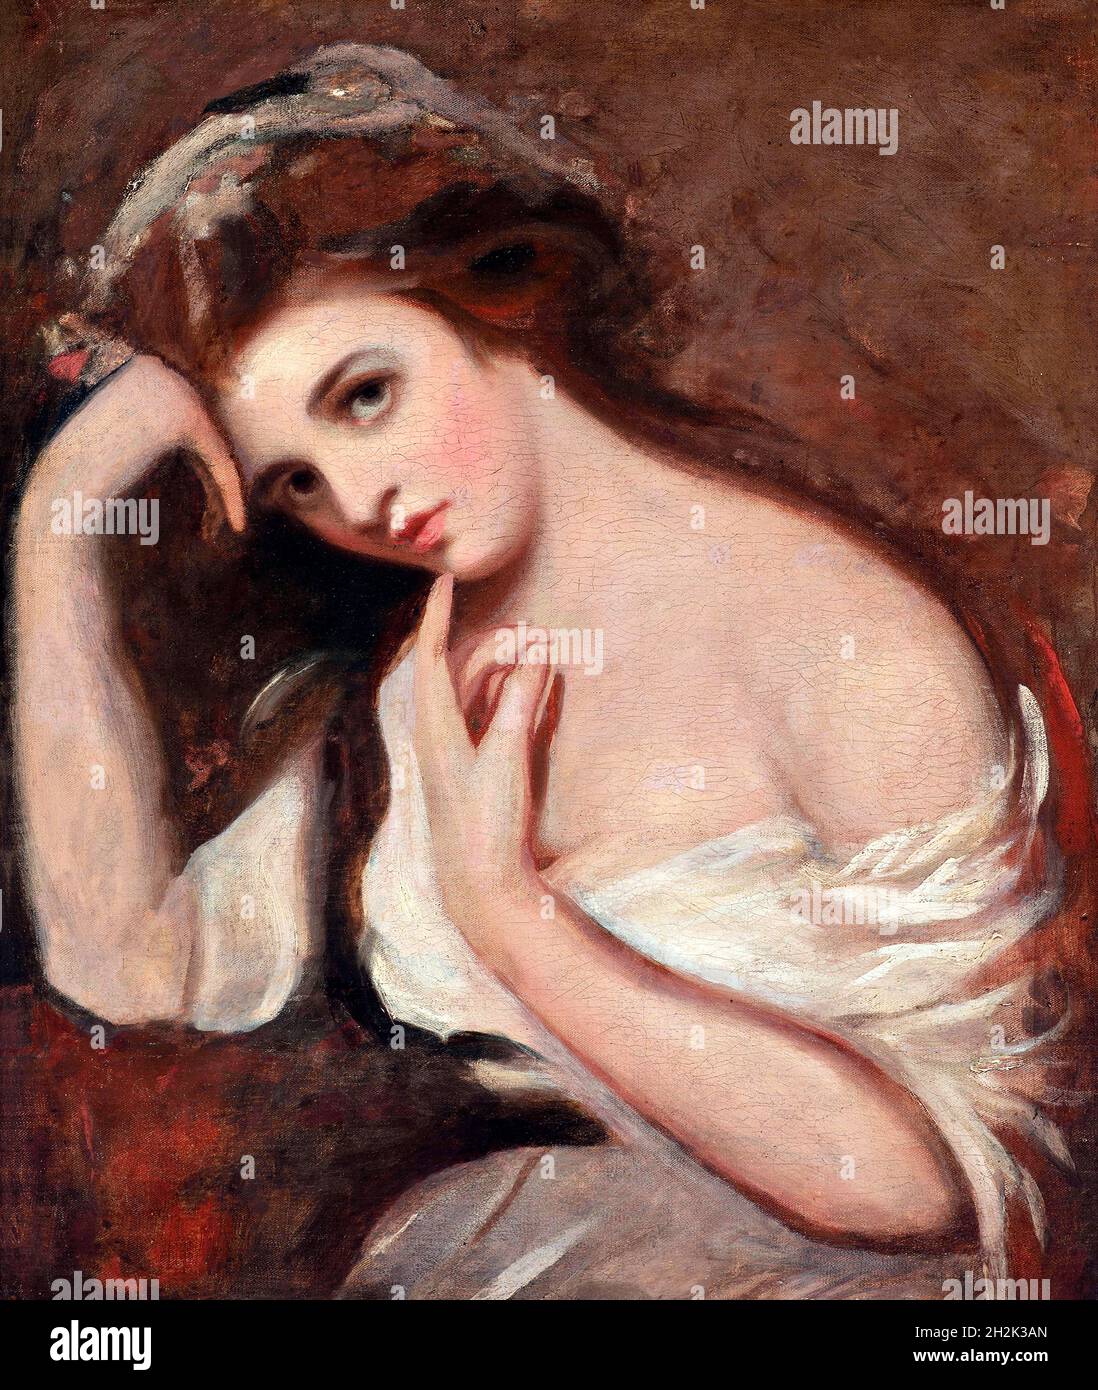 Lady Hamilton by George Romney, oil on canvas, 1783/91 . Portrait of Emma Hamilton (1765-1815), the mistress of Lord Nelson and the muse of George Romney. Stock Photo